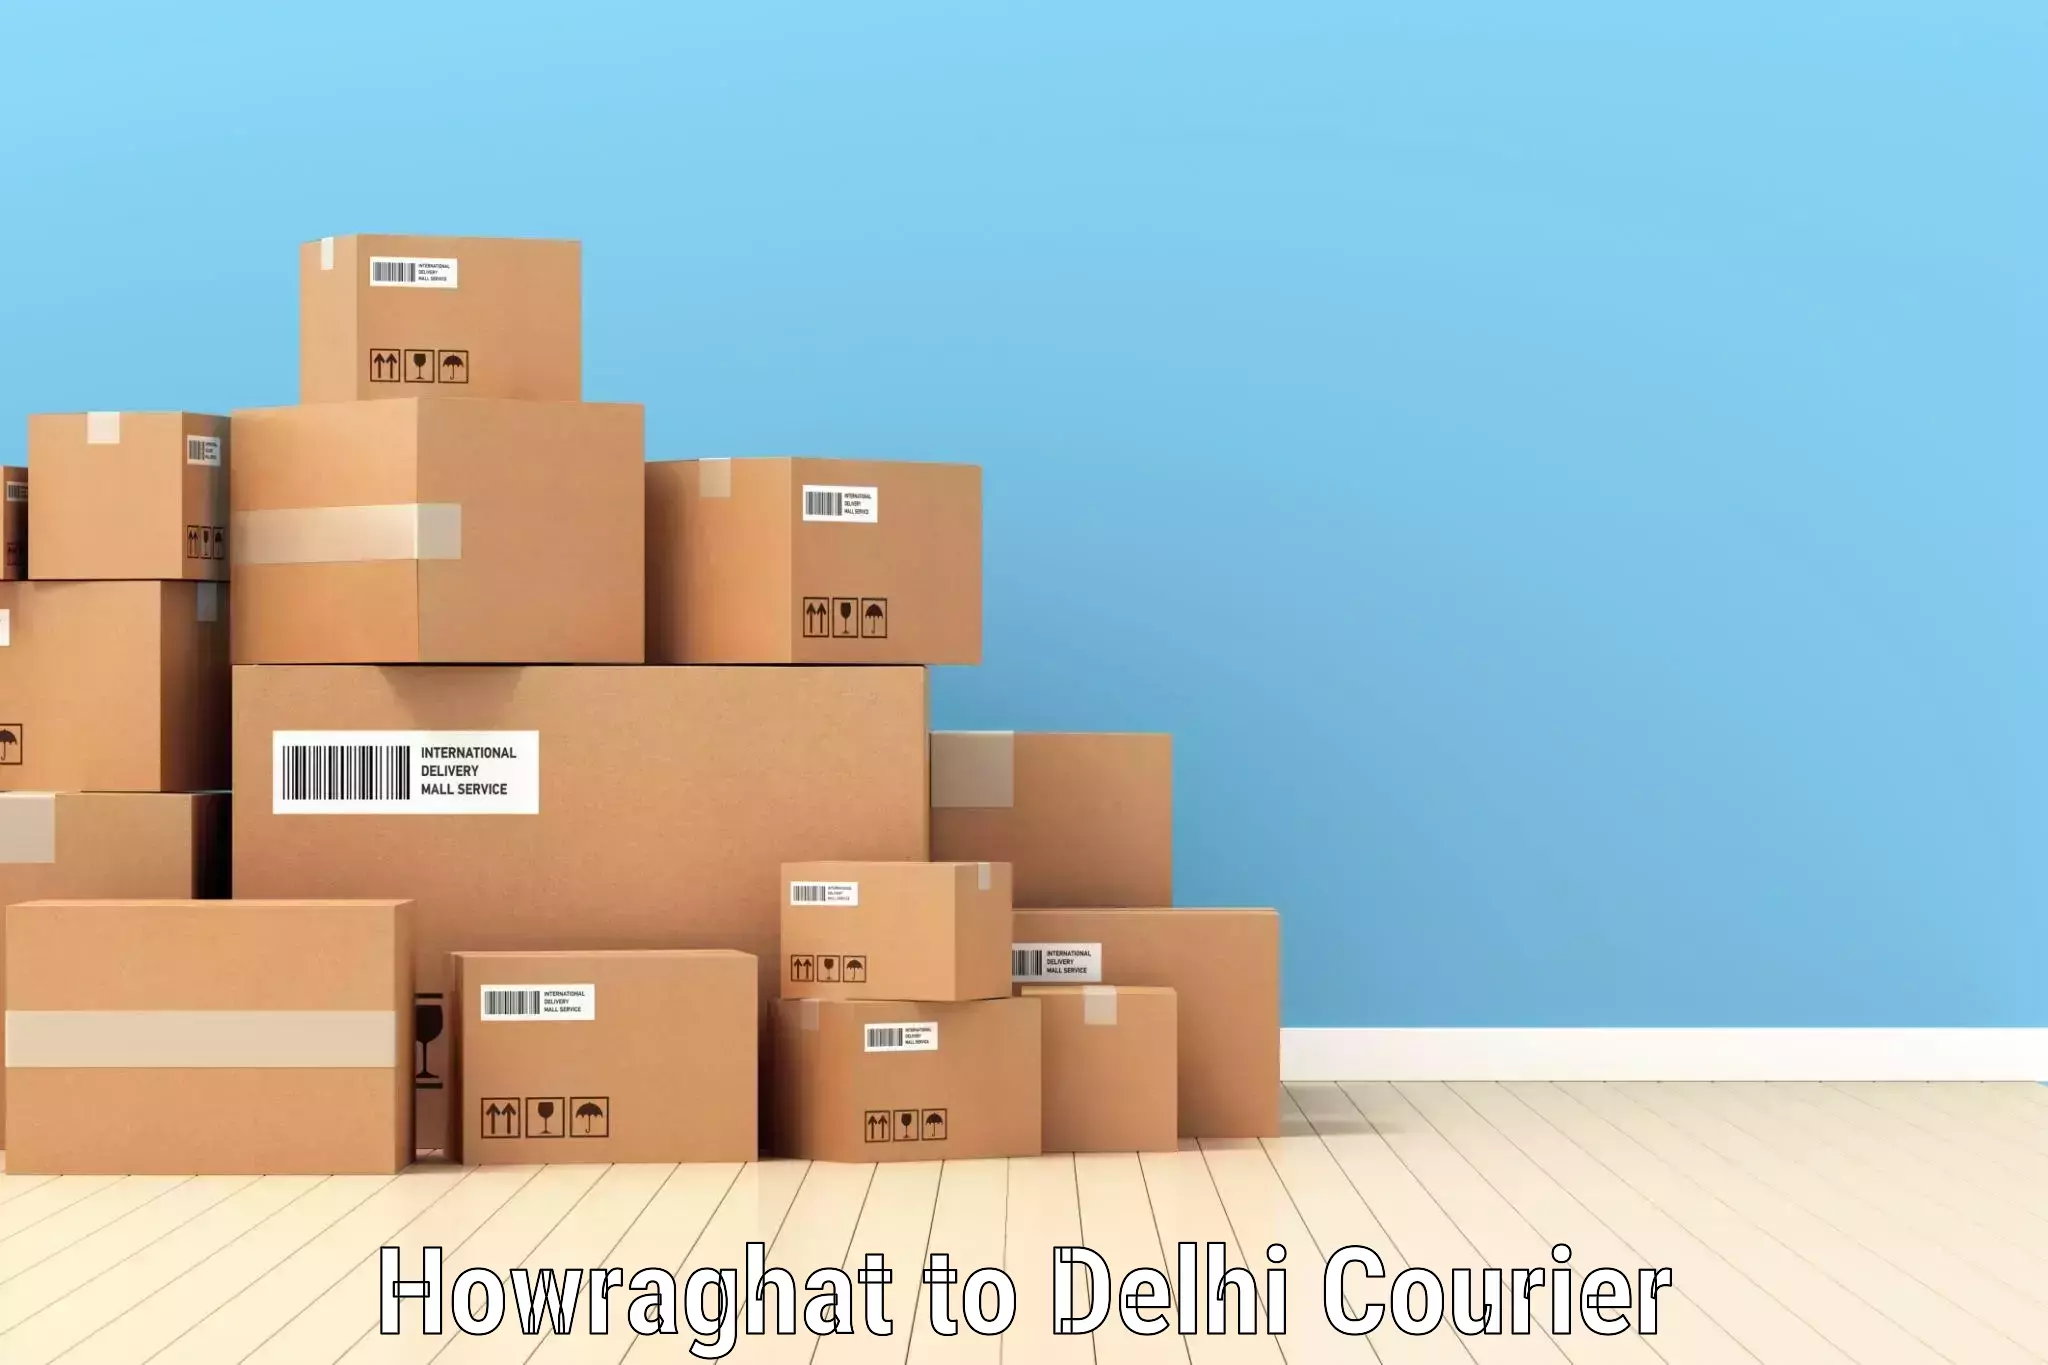 Premium courier solutions Howraghat to Lodhi Road